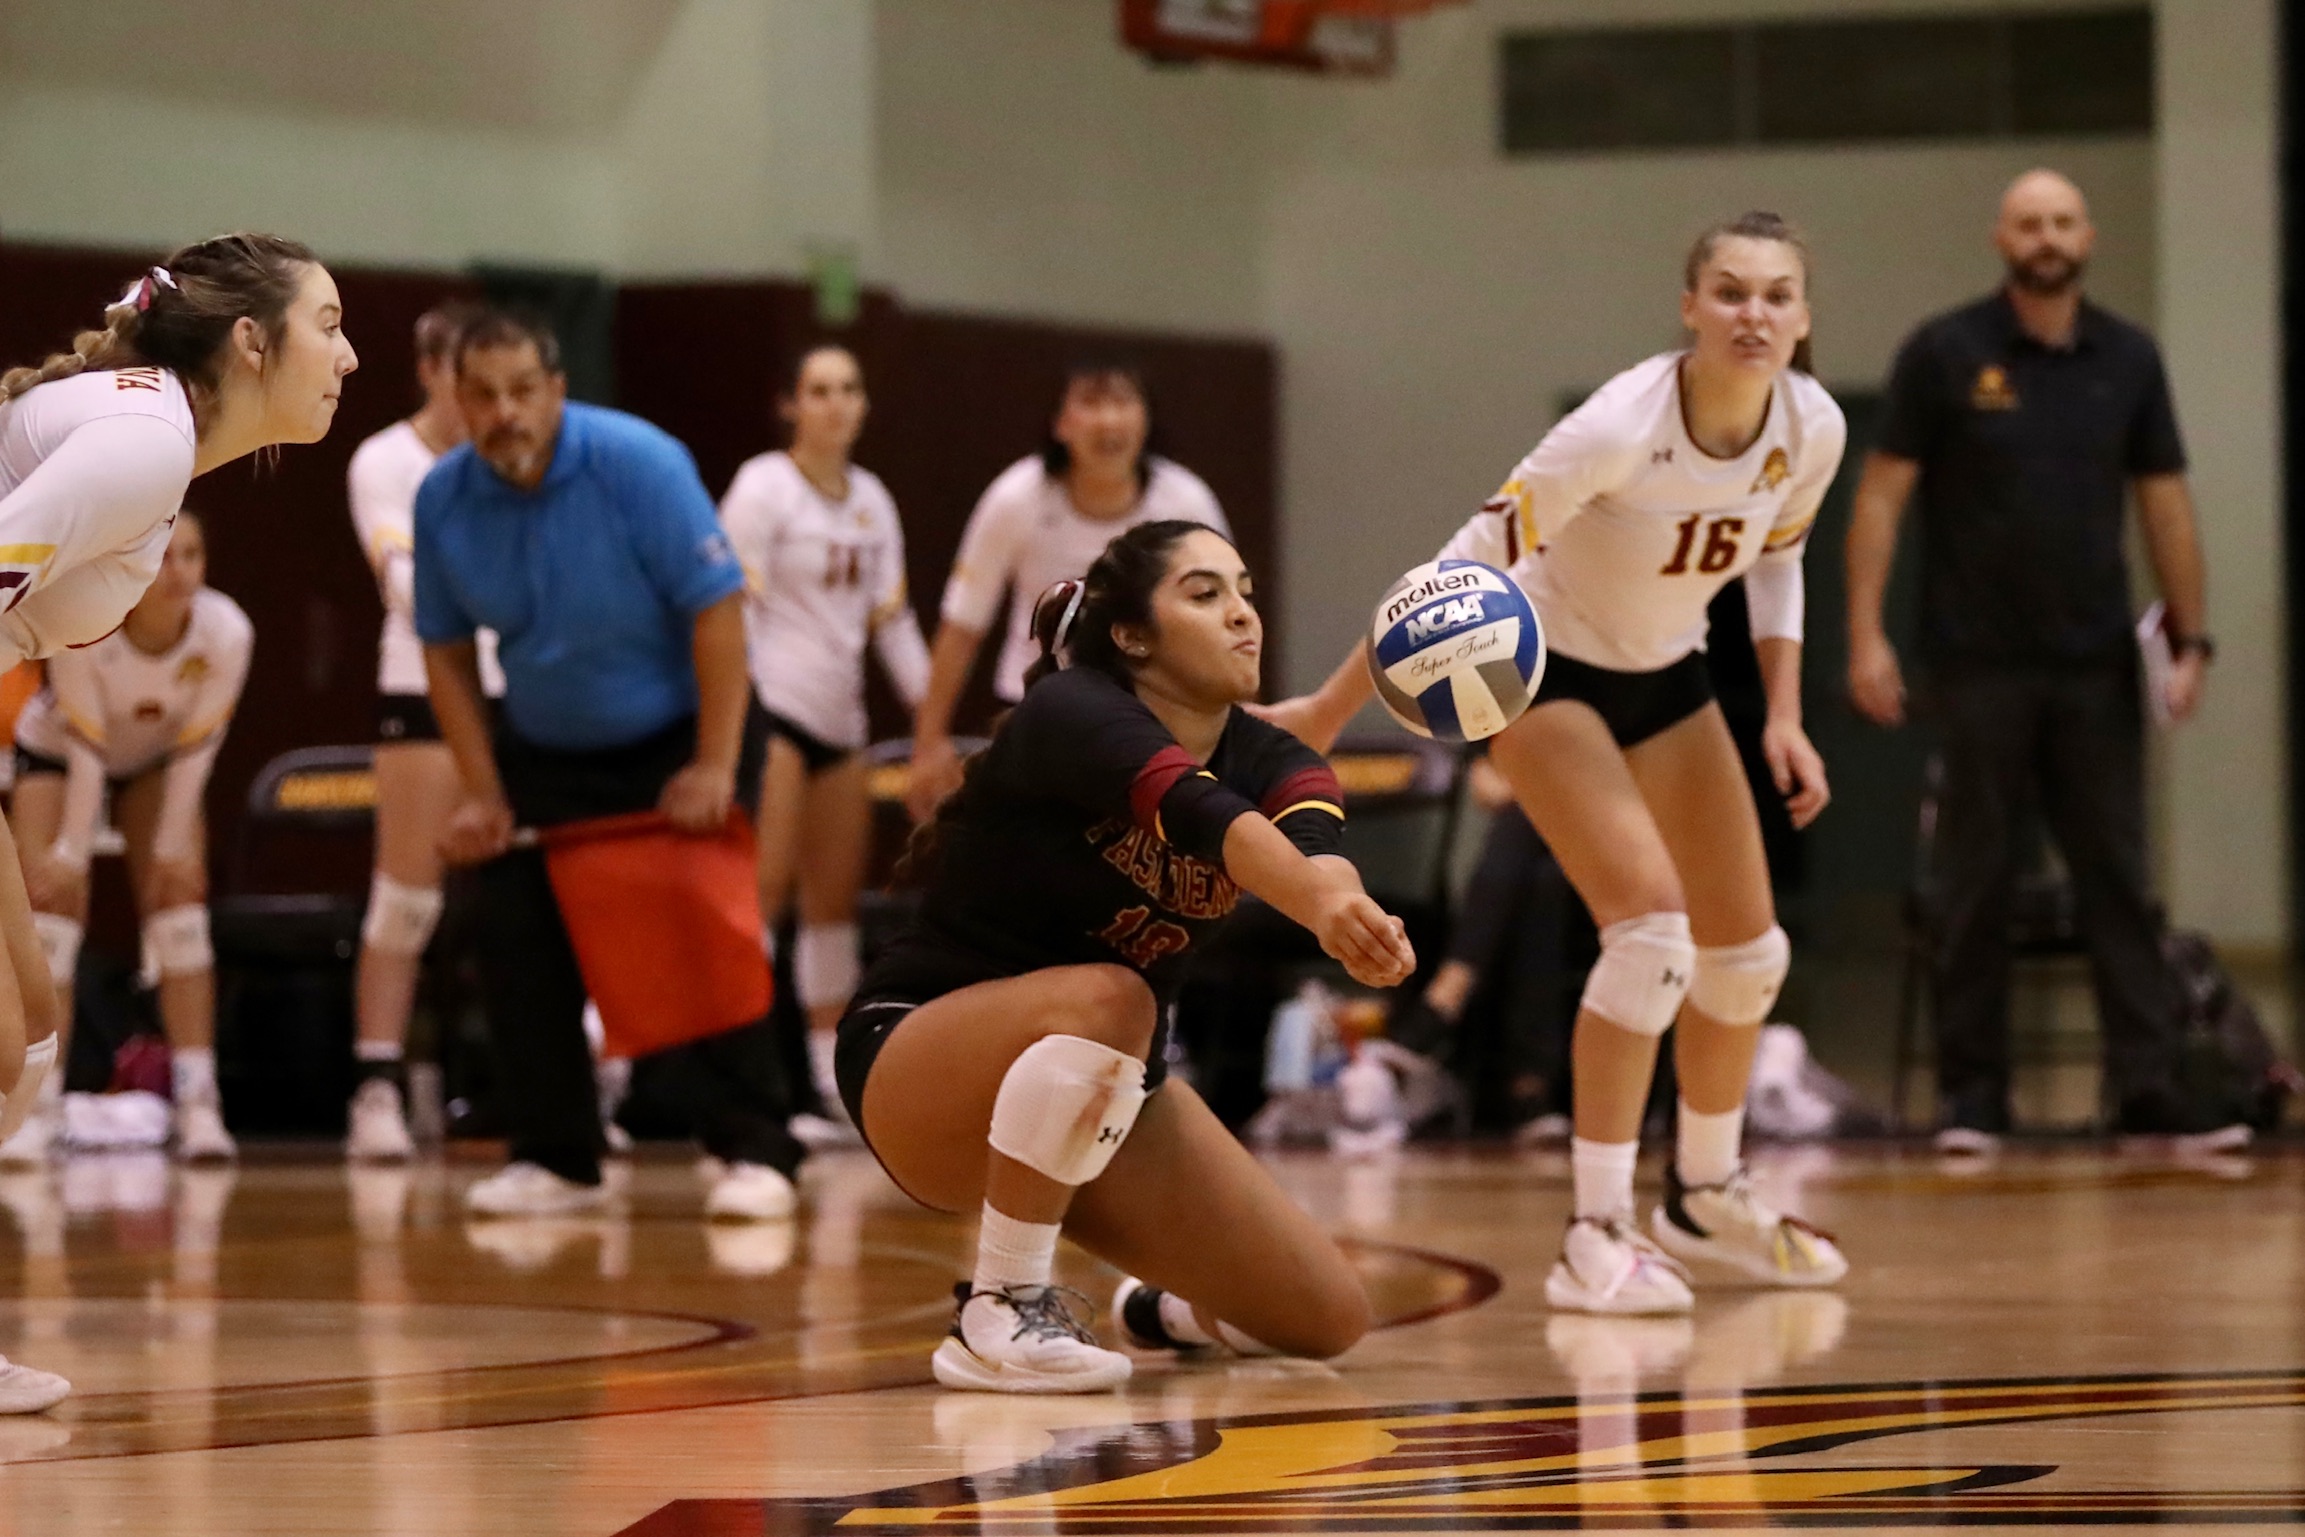 Emily Licon makes the dig during PCC's loss v. Mt. SAC on Wednesday (photo by Michael Watkins).